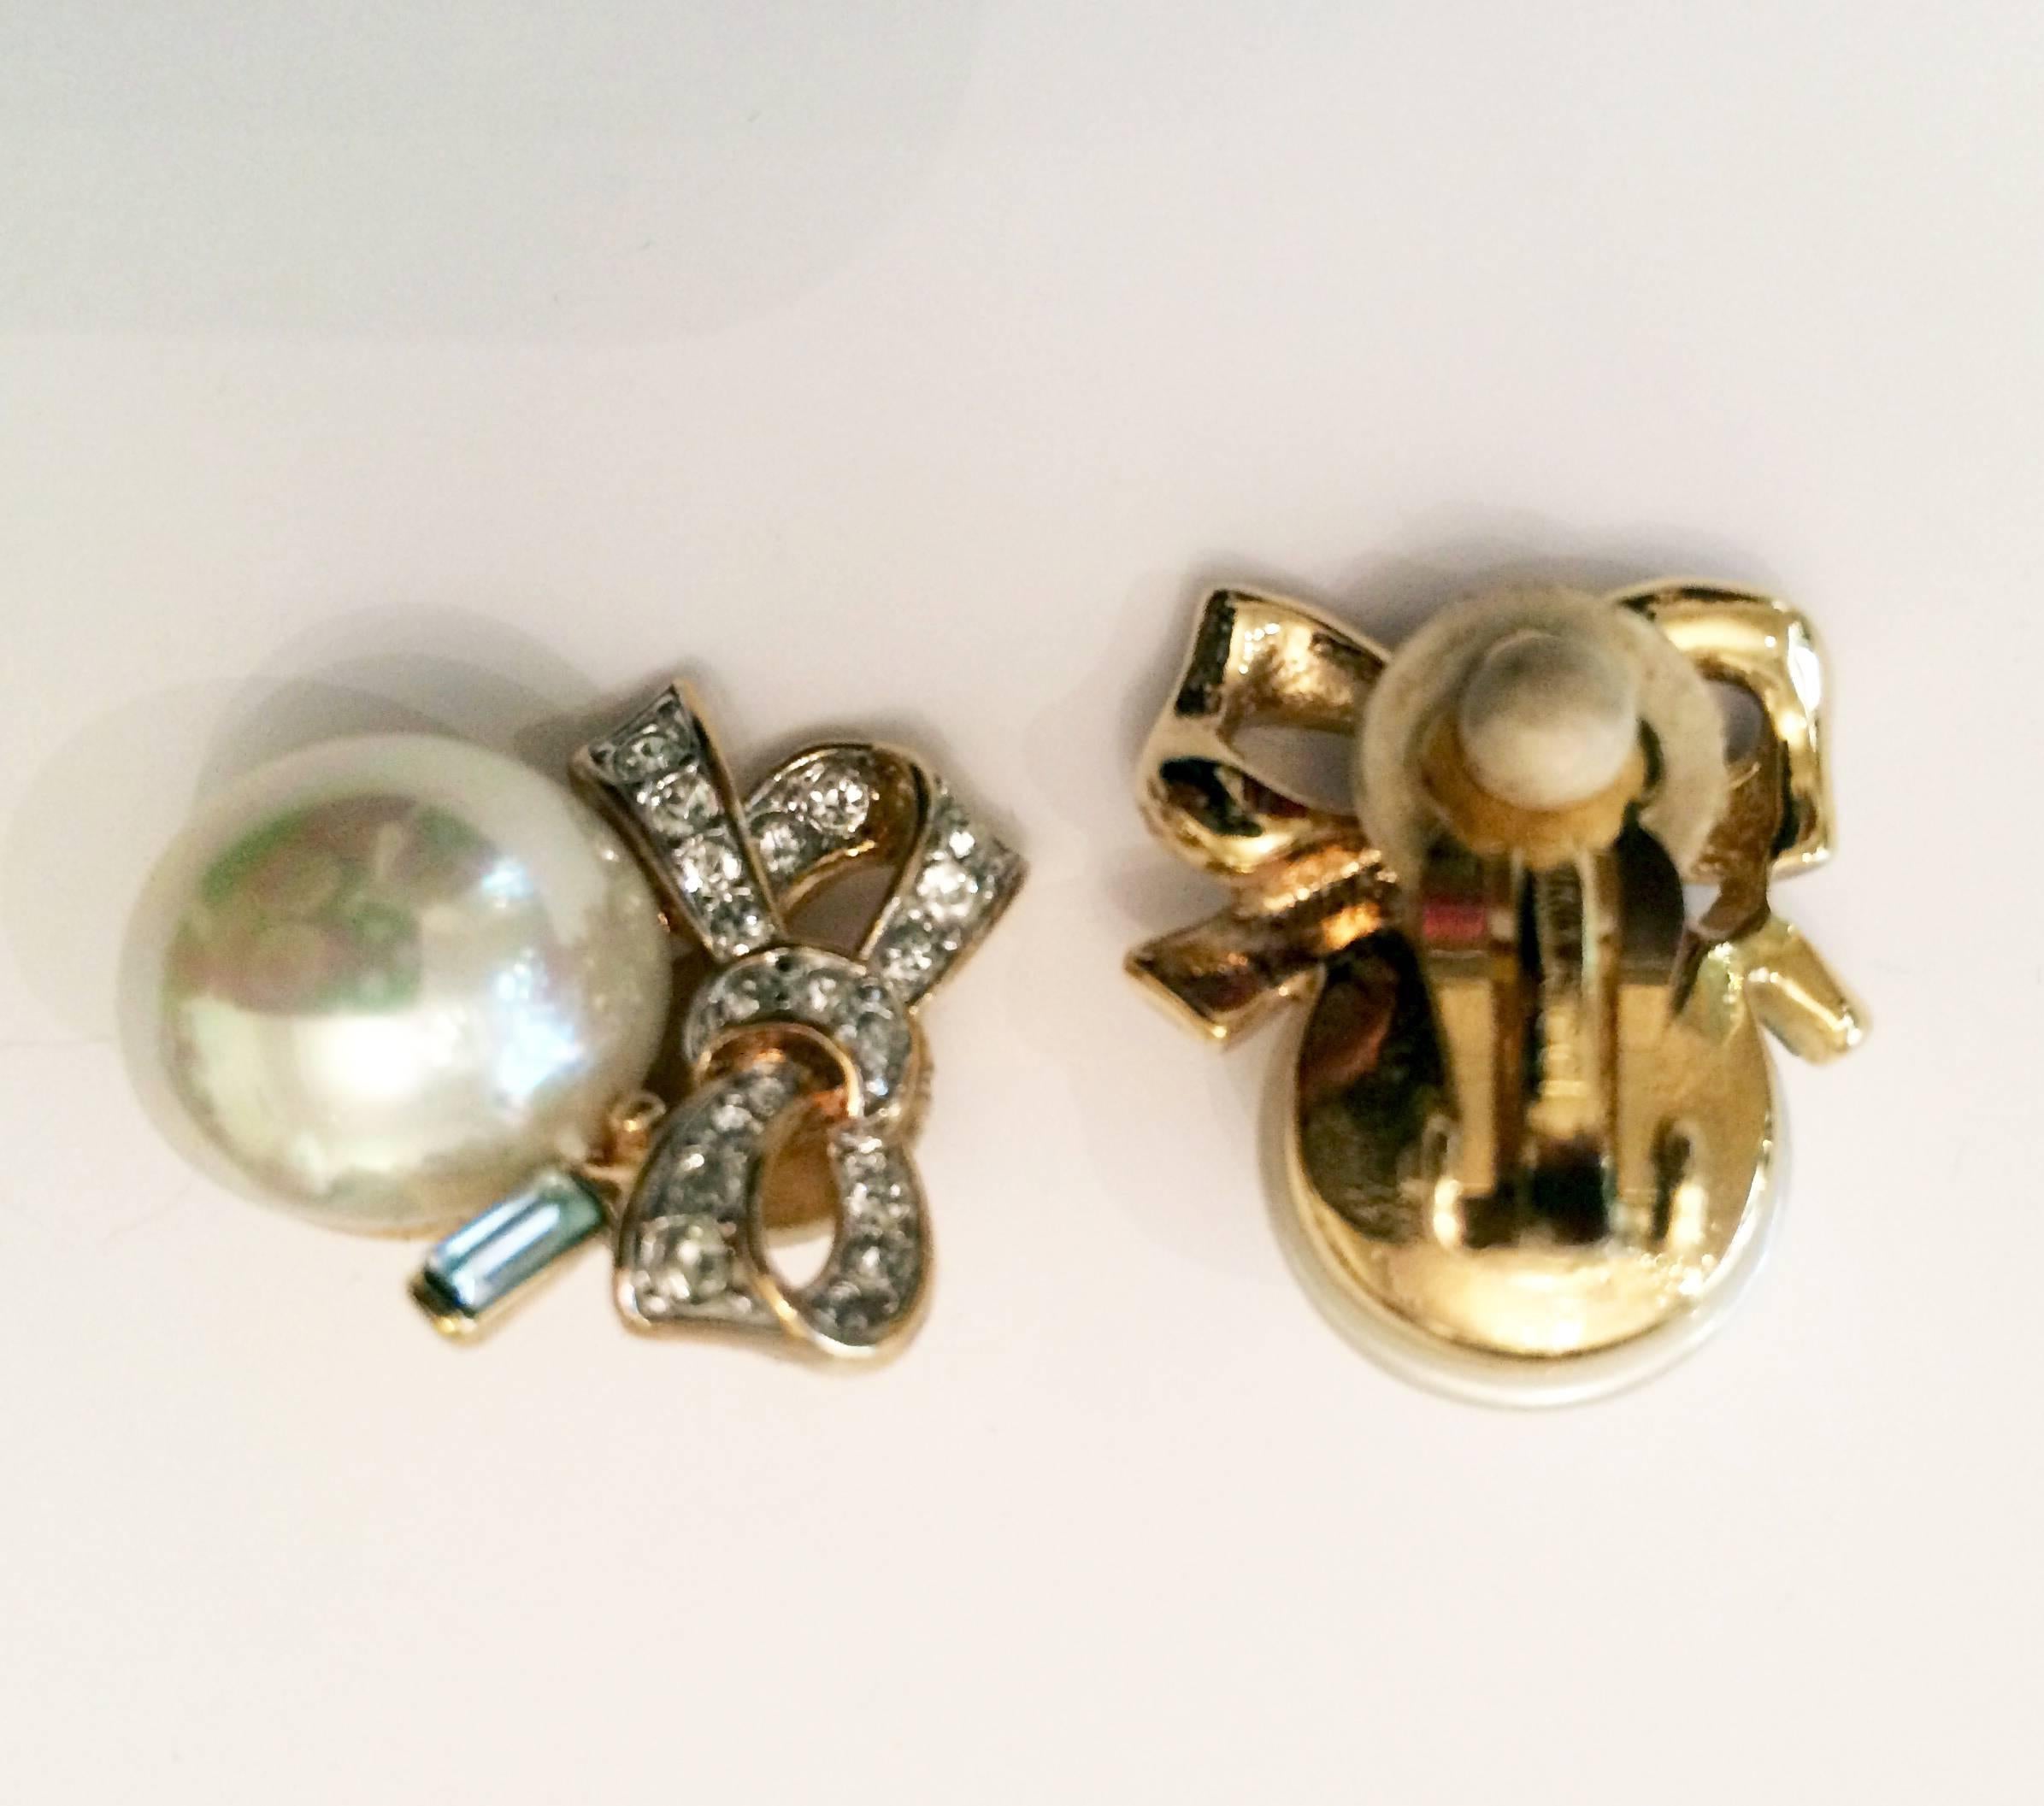 Iconic 1990s Nina Ricci earrings featuring white faux pearl balls and crystal stone decorated tied on the back side has the logo 